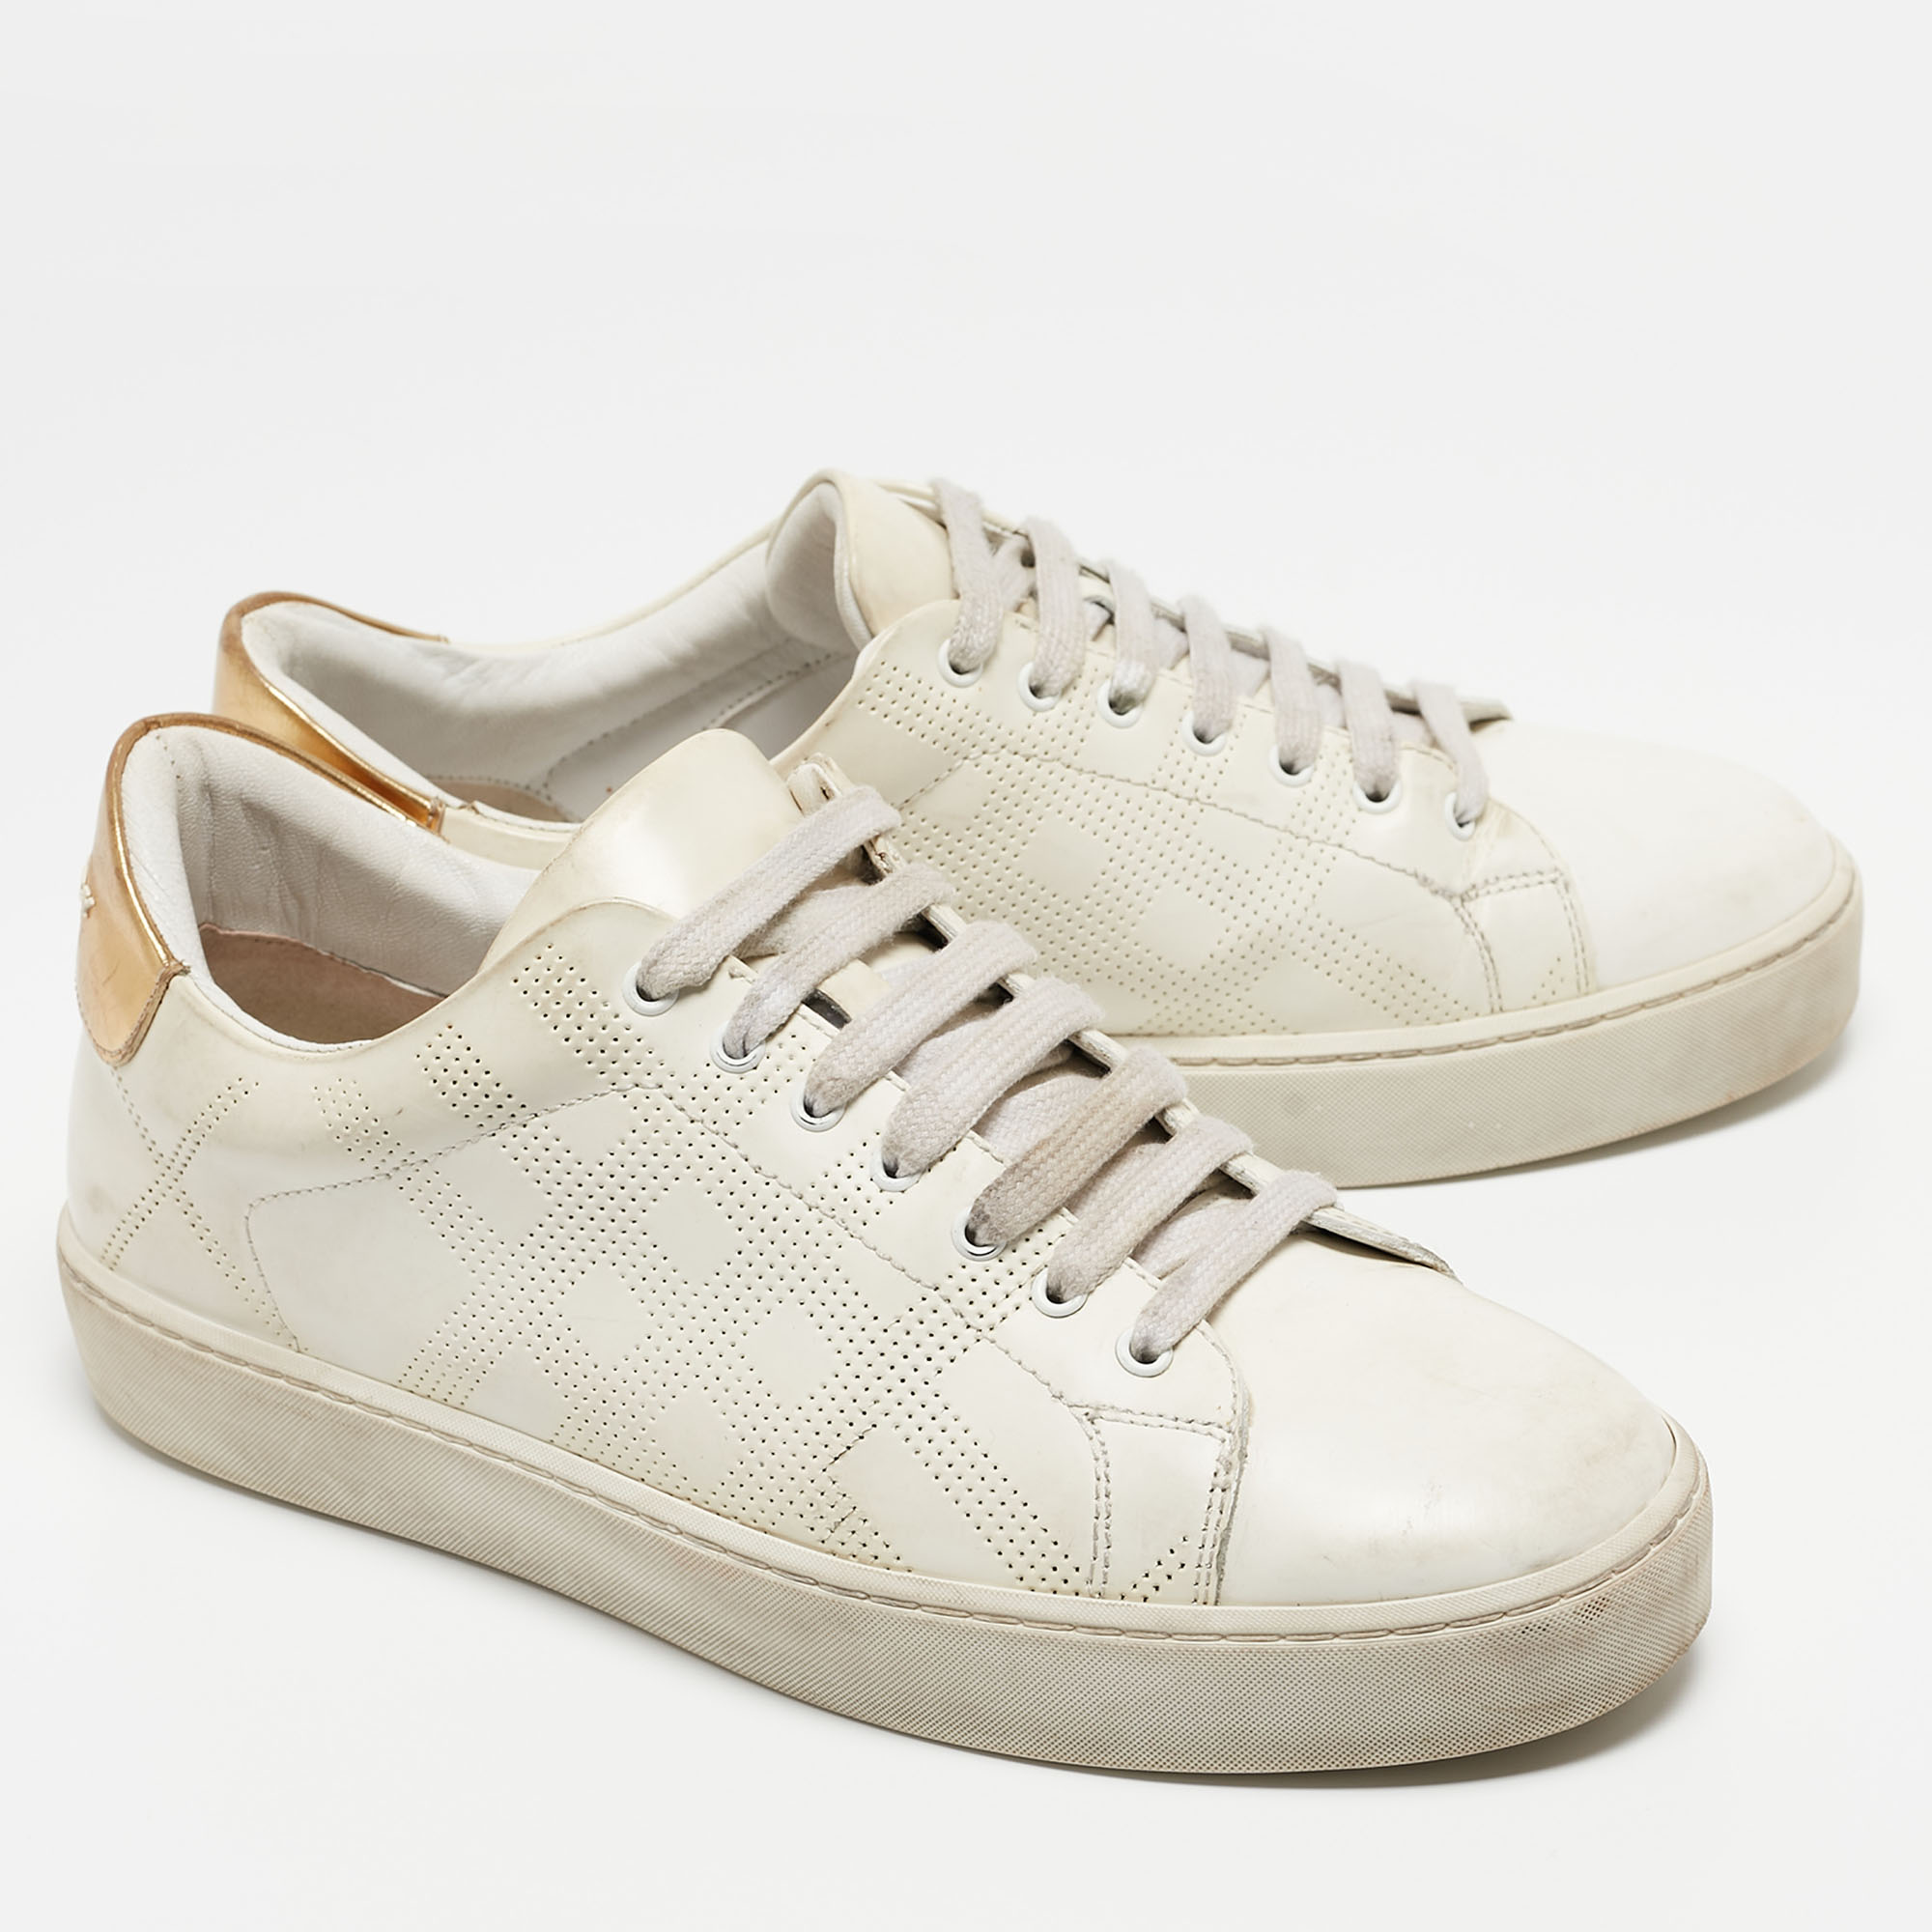 Burberry White/Gold Perforated Leather Westford Sneakers Size 38.5